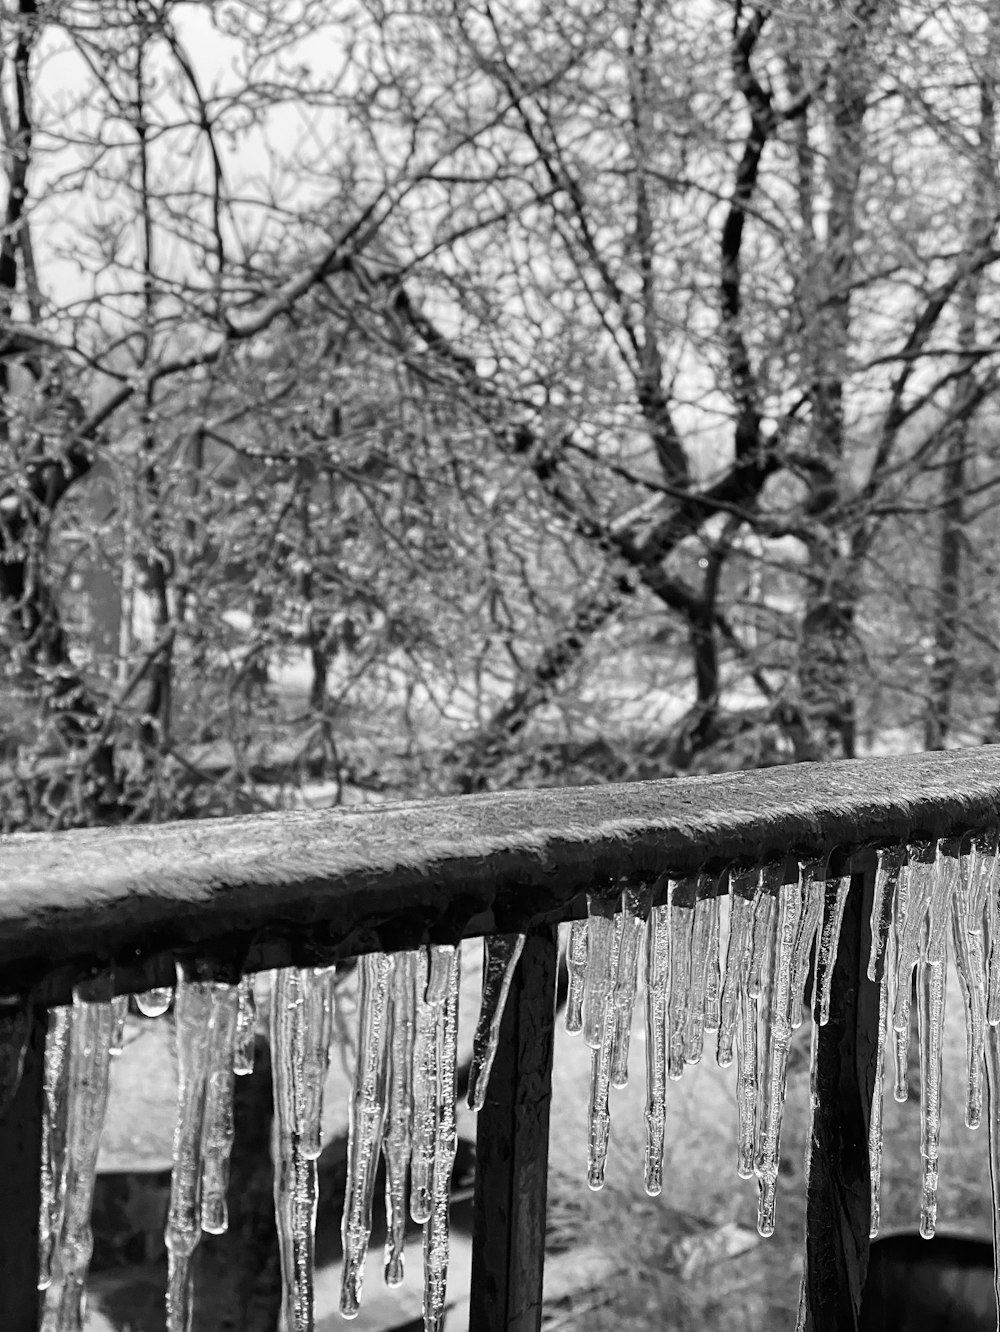 a black and white photo of icicles hanging from a wooden fence